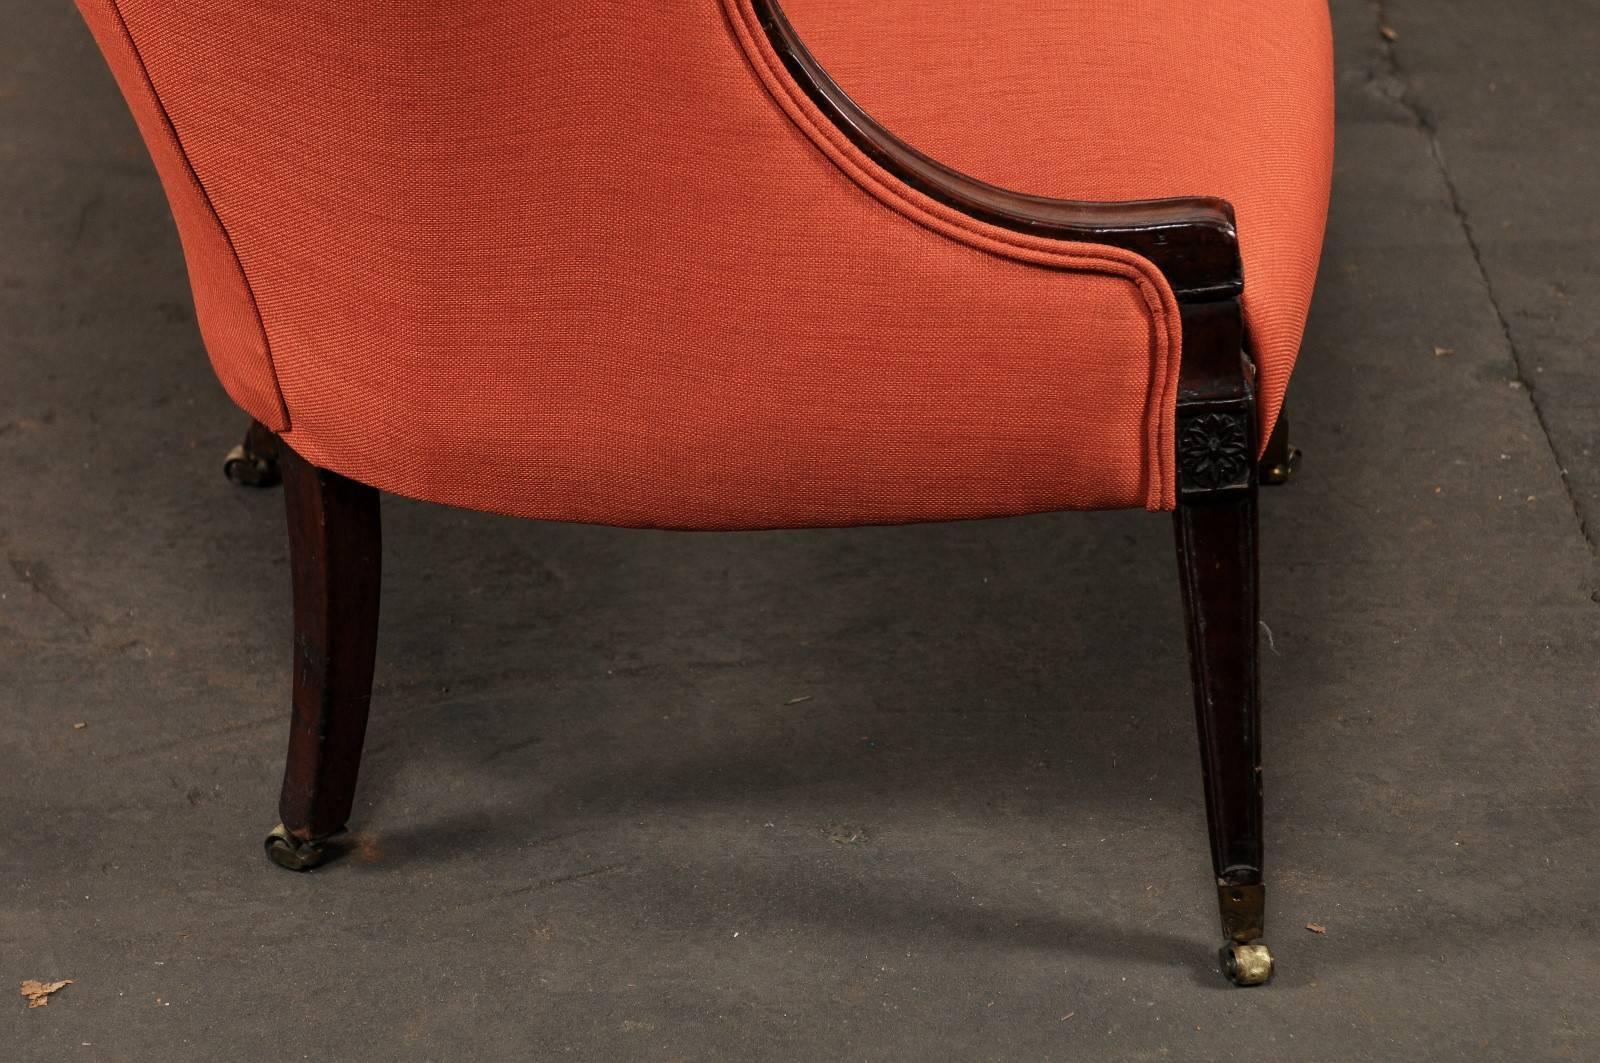 18th-19th Century American Federal Mahogany Upholstered Settee 3